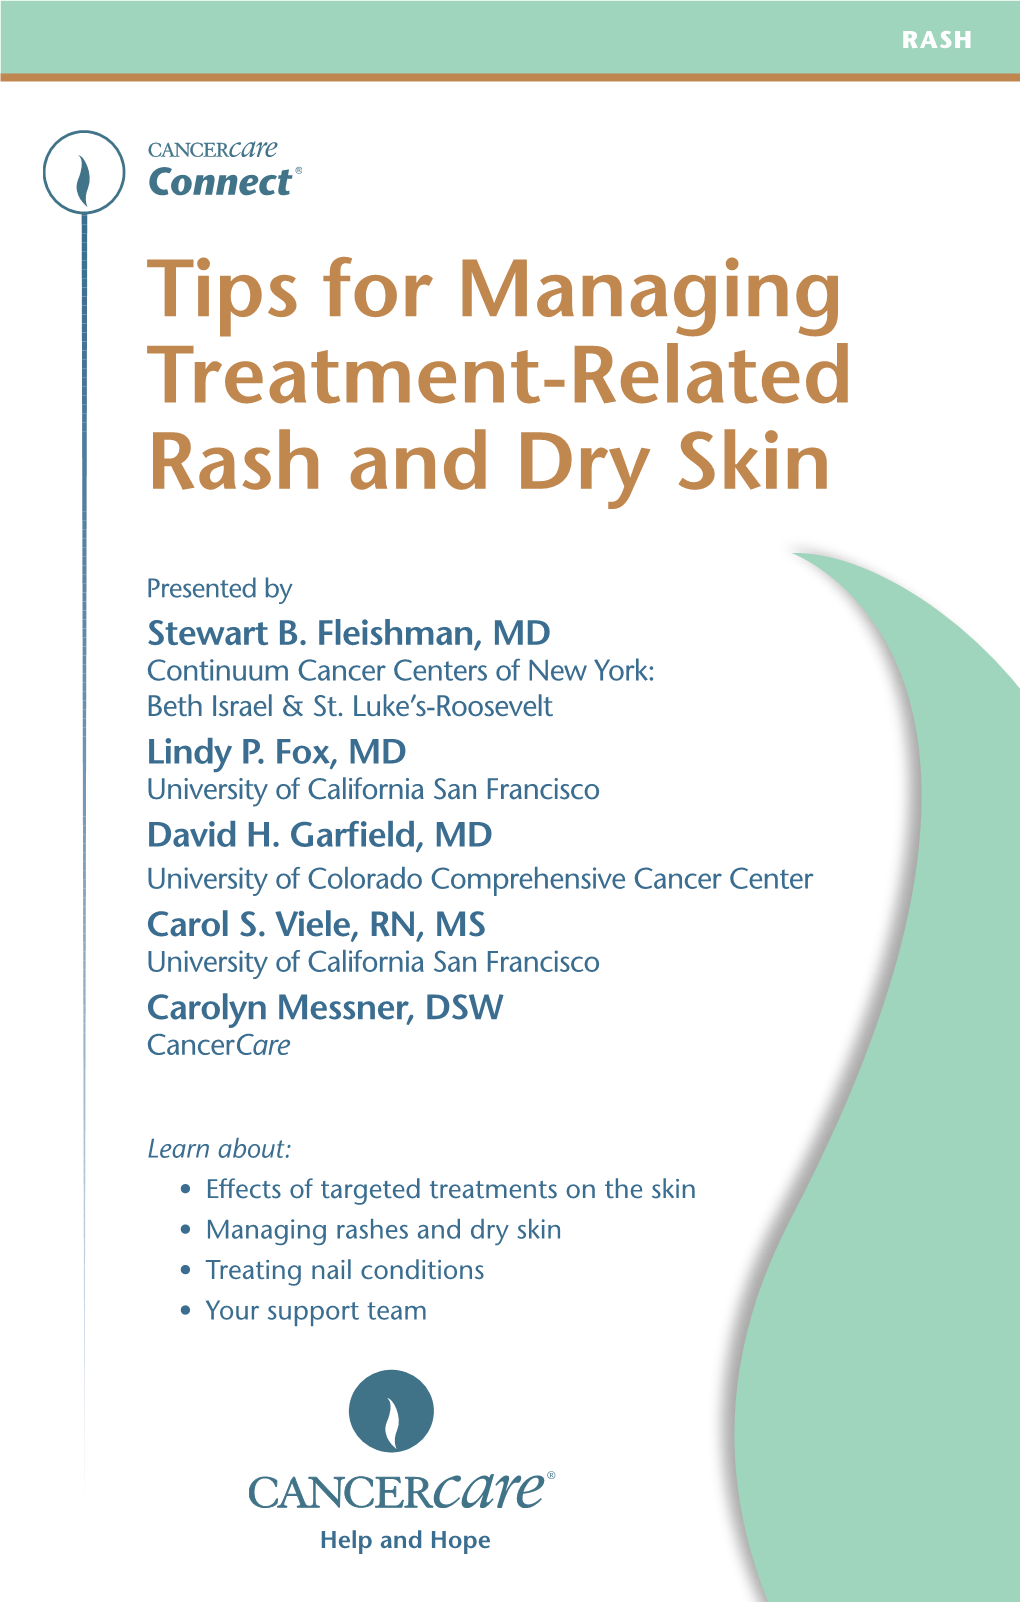 Tips for Managing Treatment-Related Rash and Dry Skin